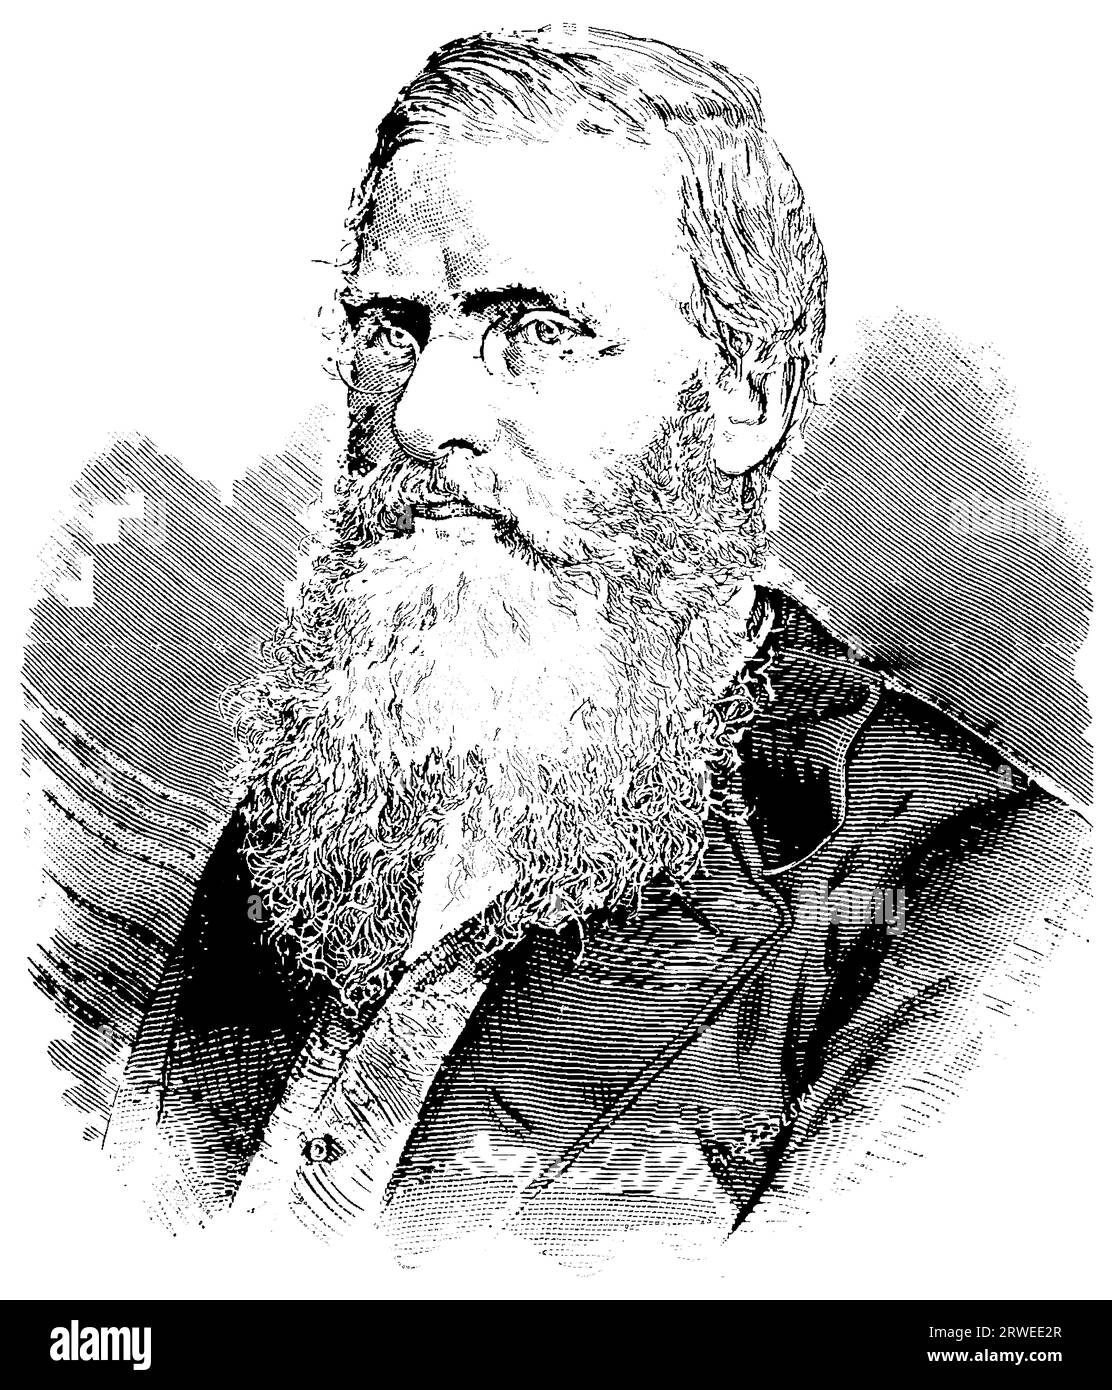 Alfred Russel Wallace, father of biogeography - vintage engraving illustration Stock Photo